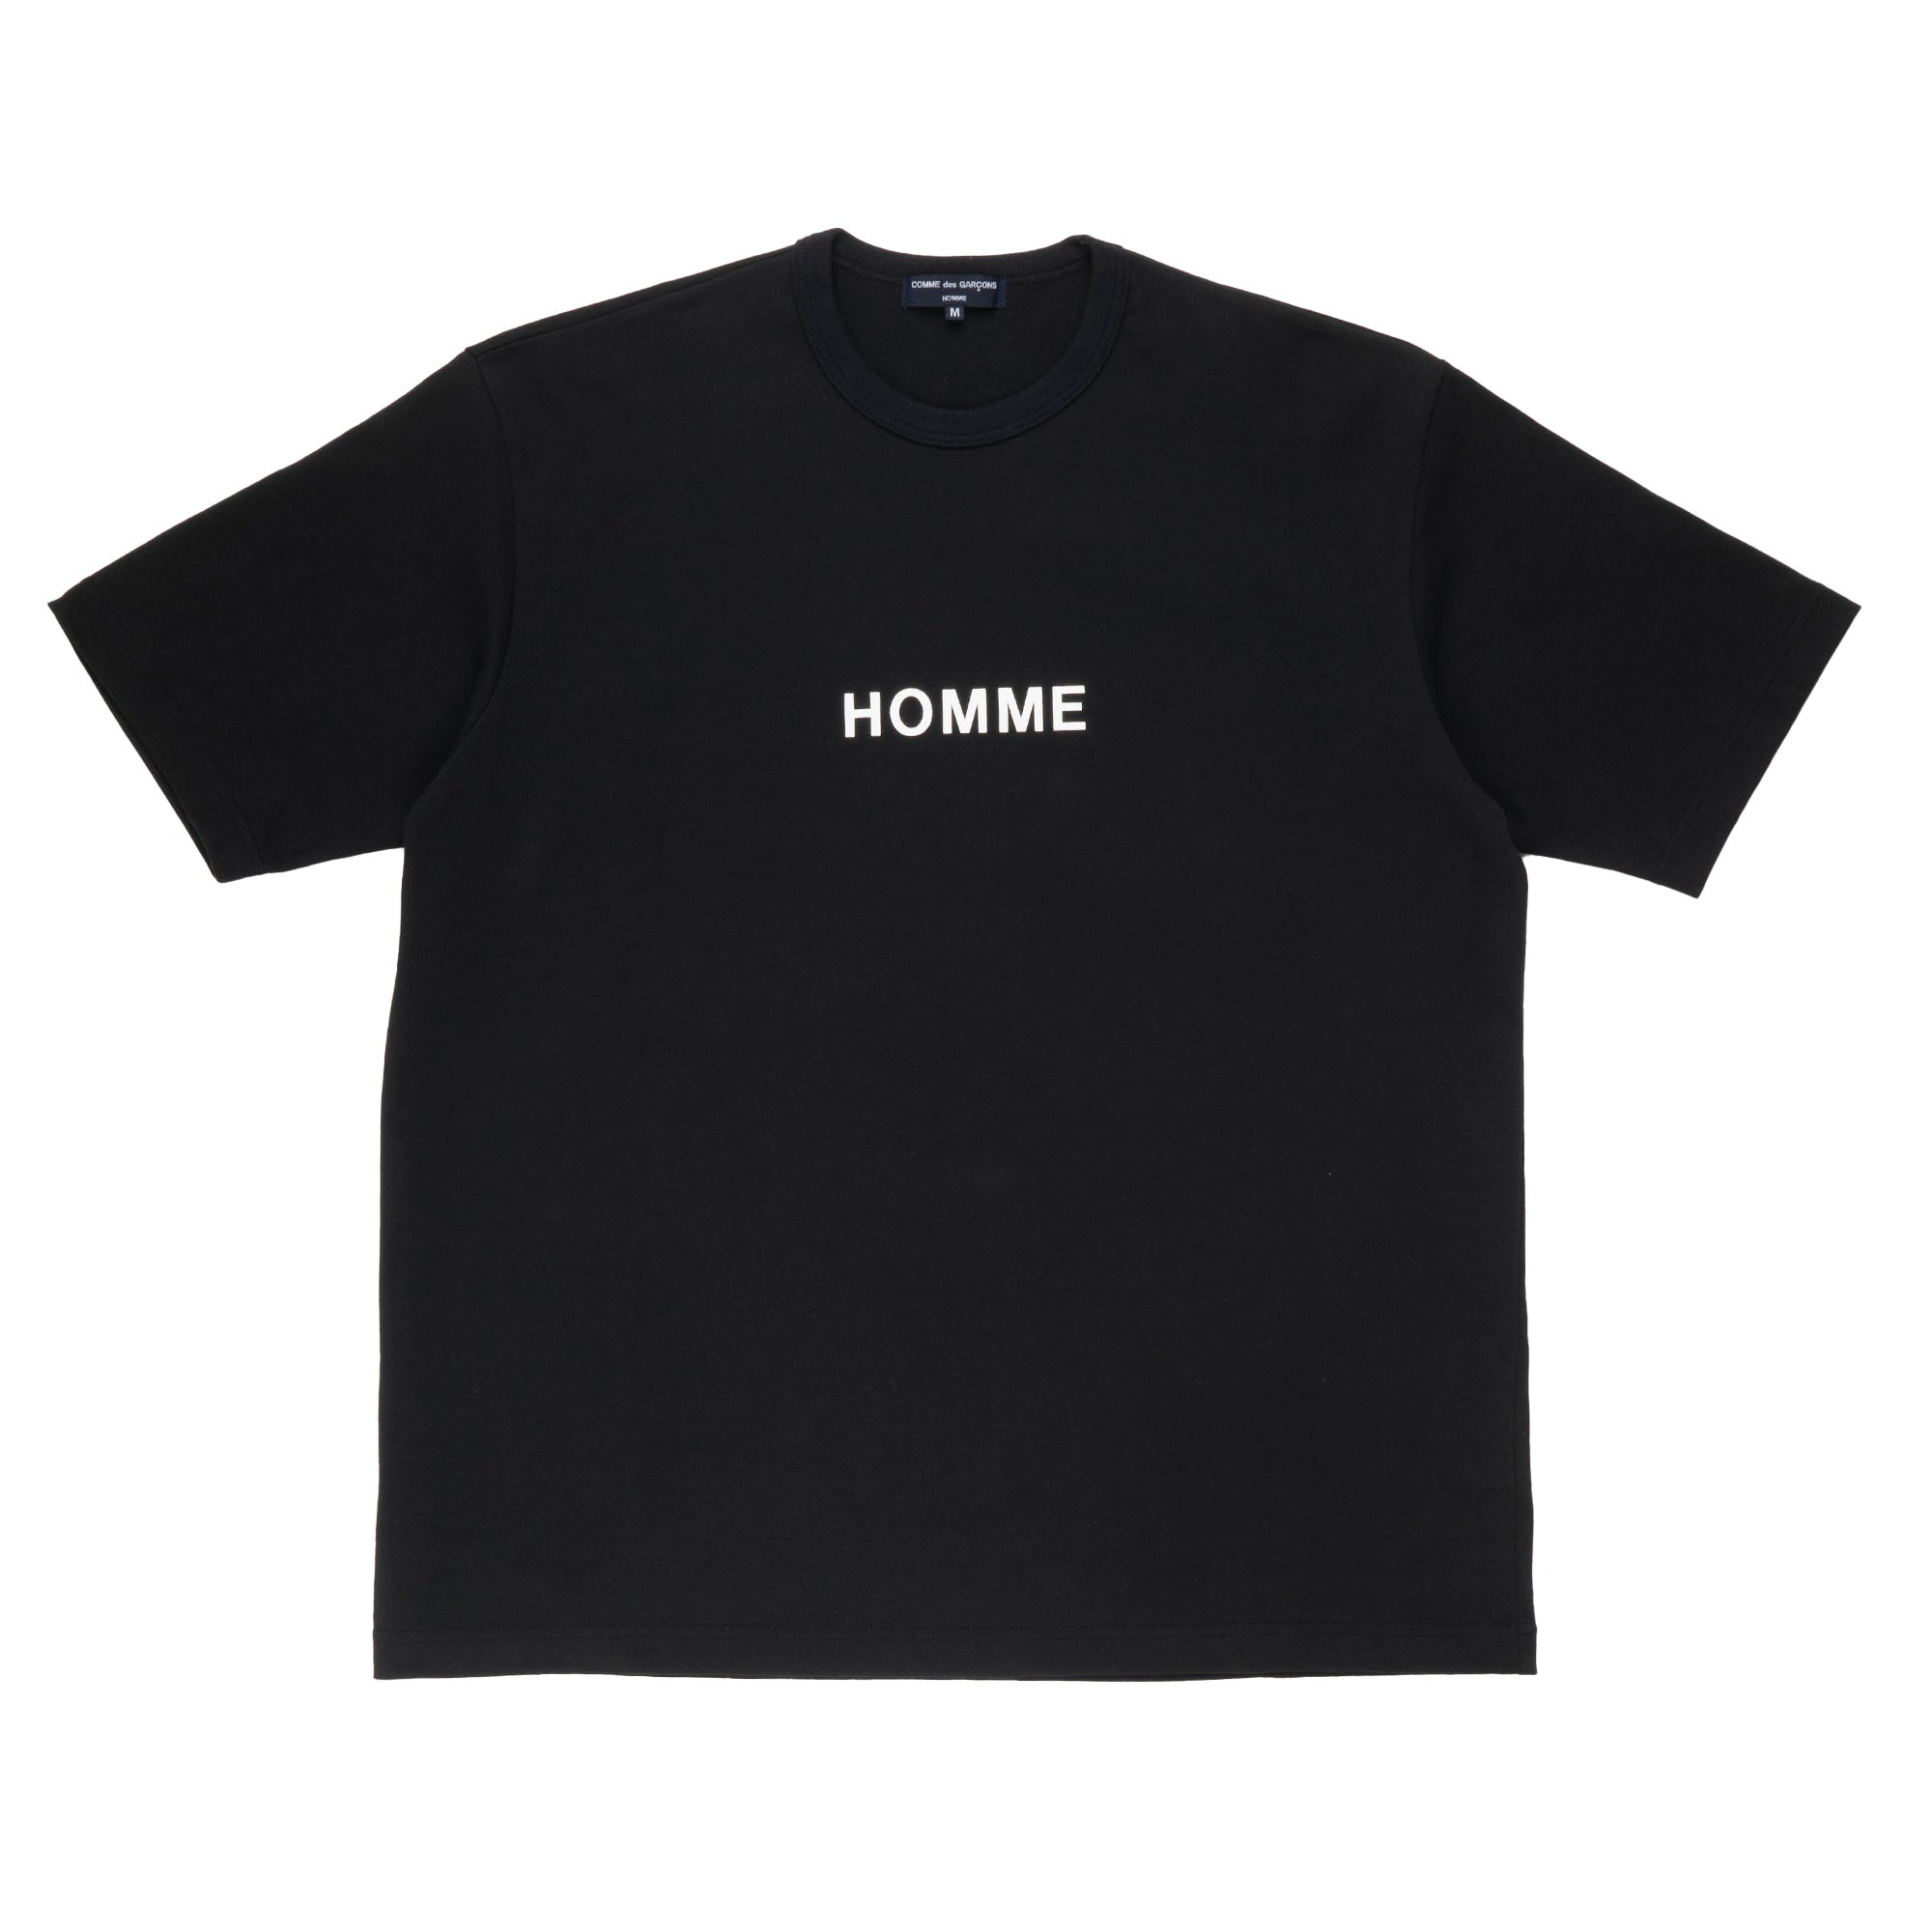 HOMME script logo printed at chest